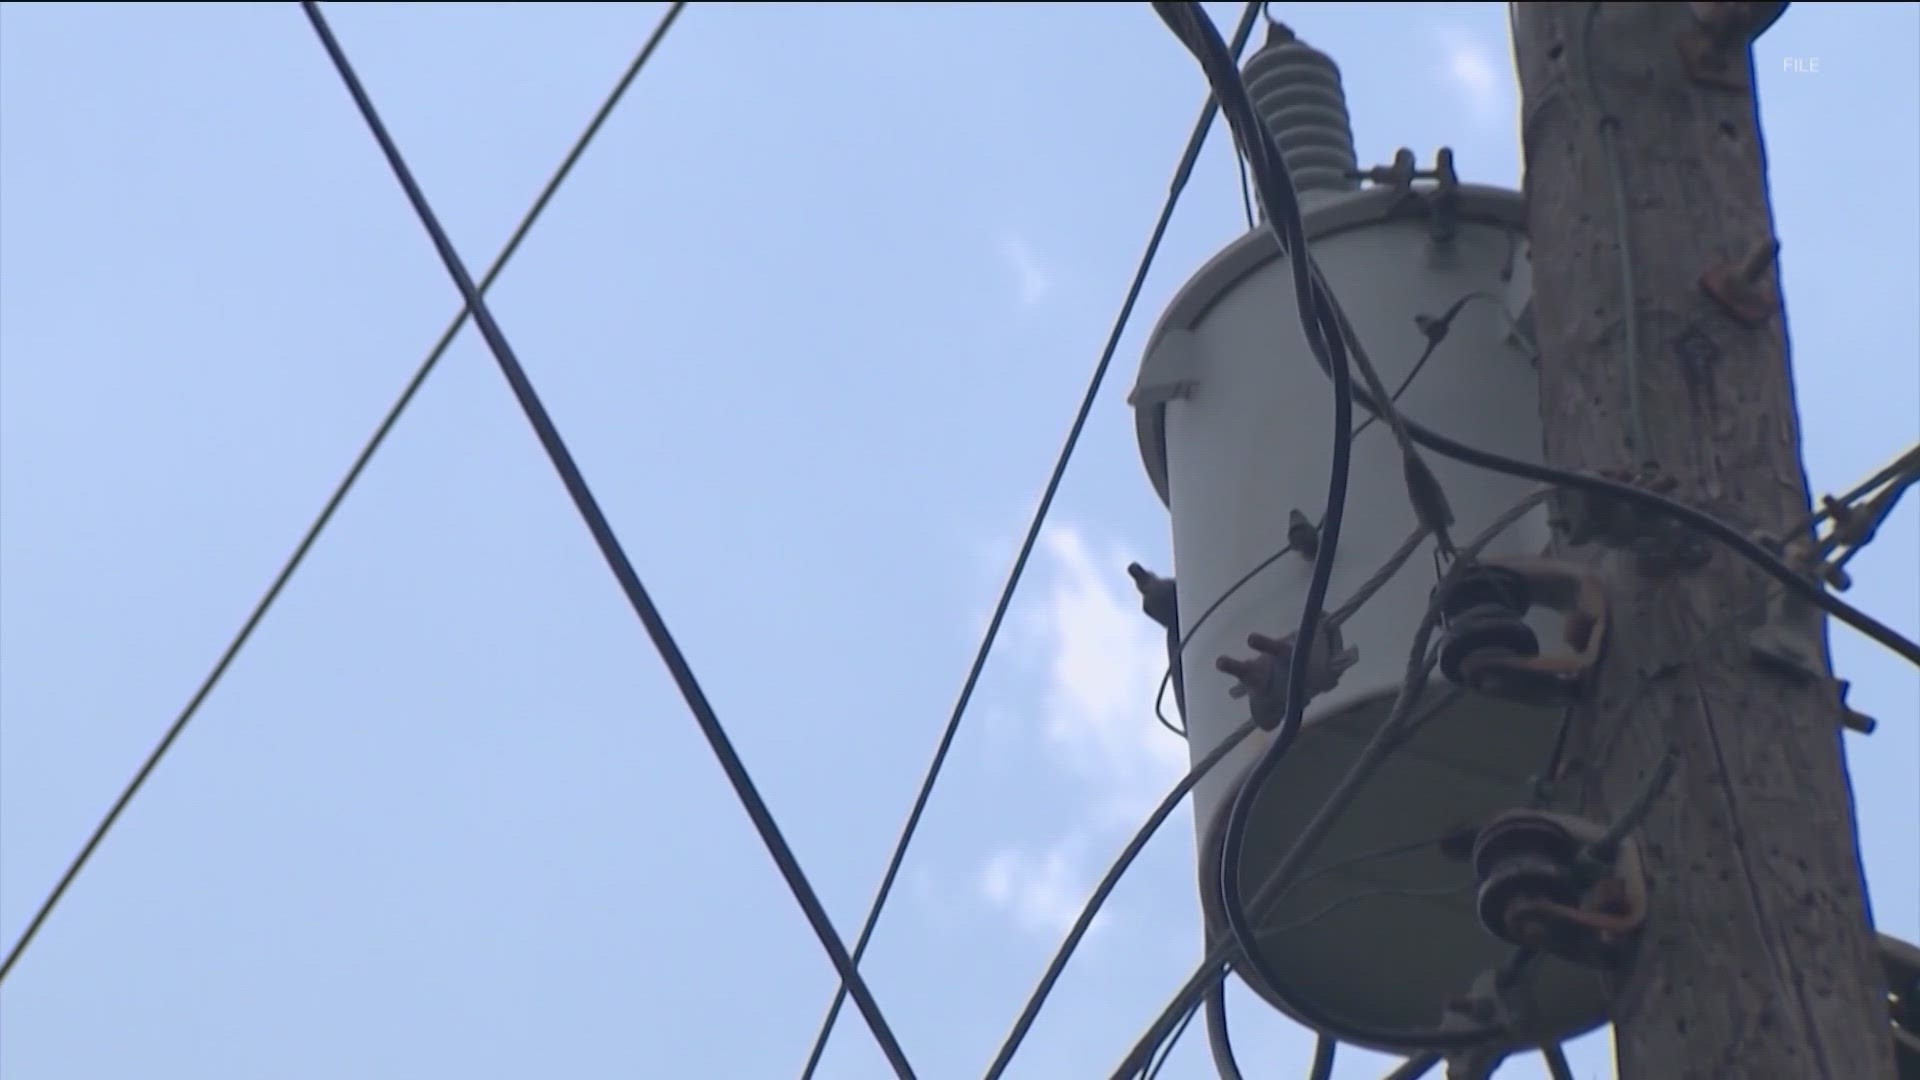 ERCOT is warning about some possible issues with the power grid over the next few days.